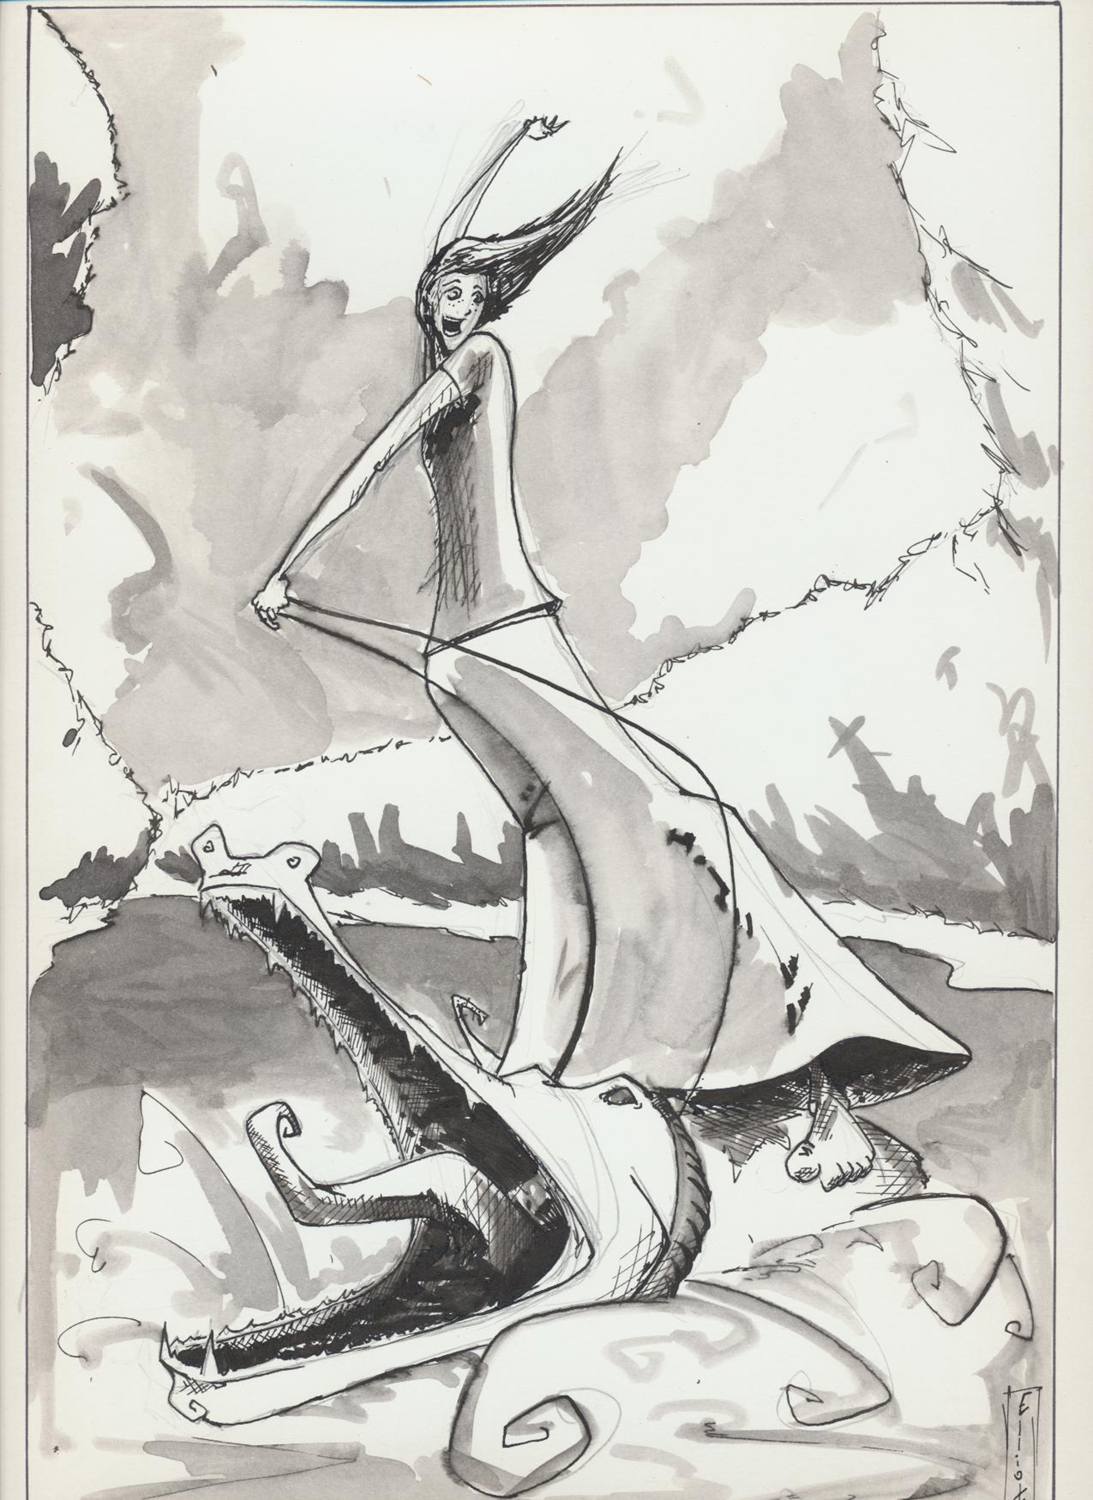 Black and white pen & ink rendition of the painting of Sal Fink, daughter of the "King of the Keelboaters" Mike Fink, rides down the Mississippi River on the back of an alligator. Photo credit: Lucas Elliott